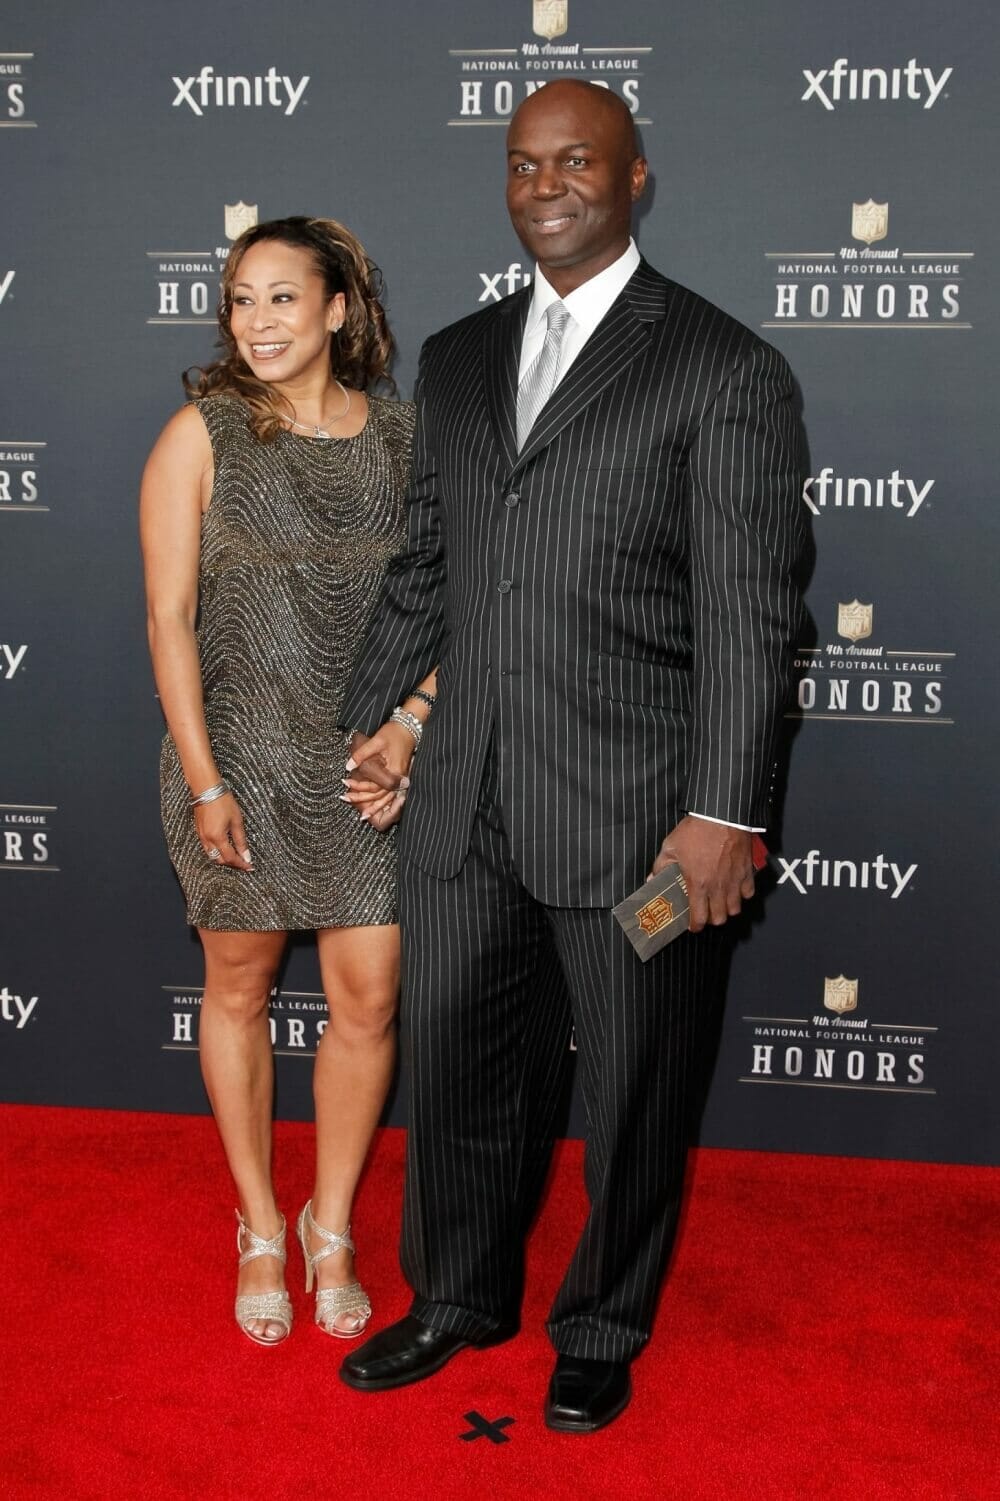 Todd Bowles’ wife Taneka Bowles pictures